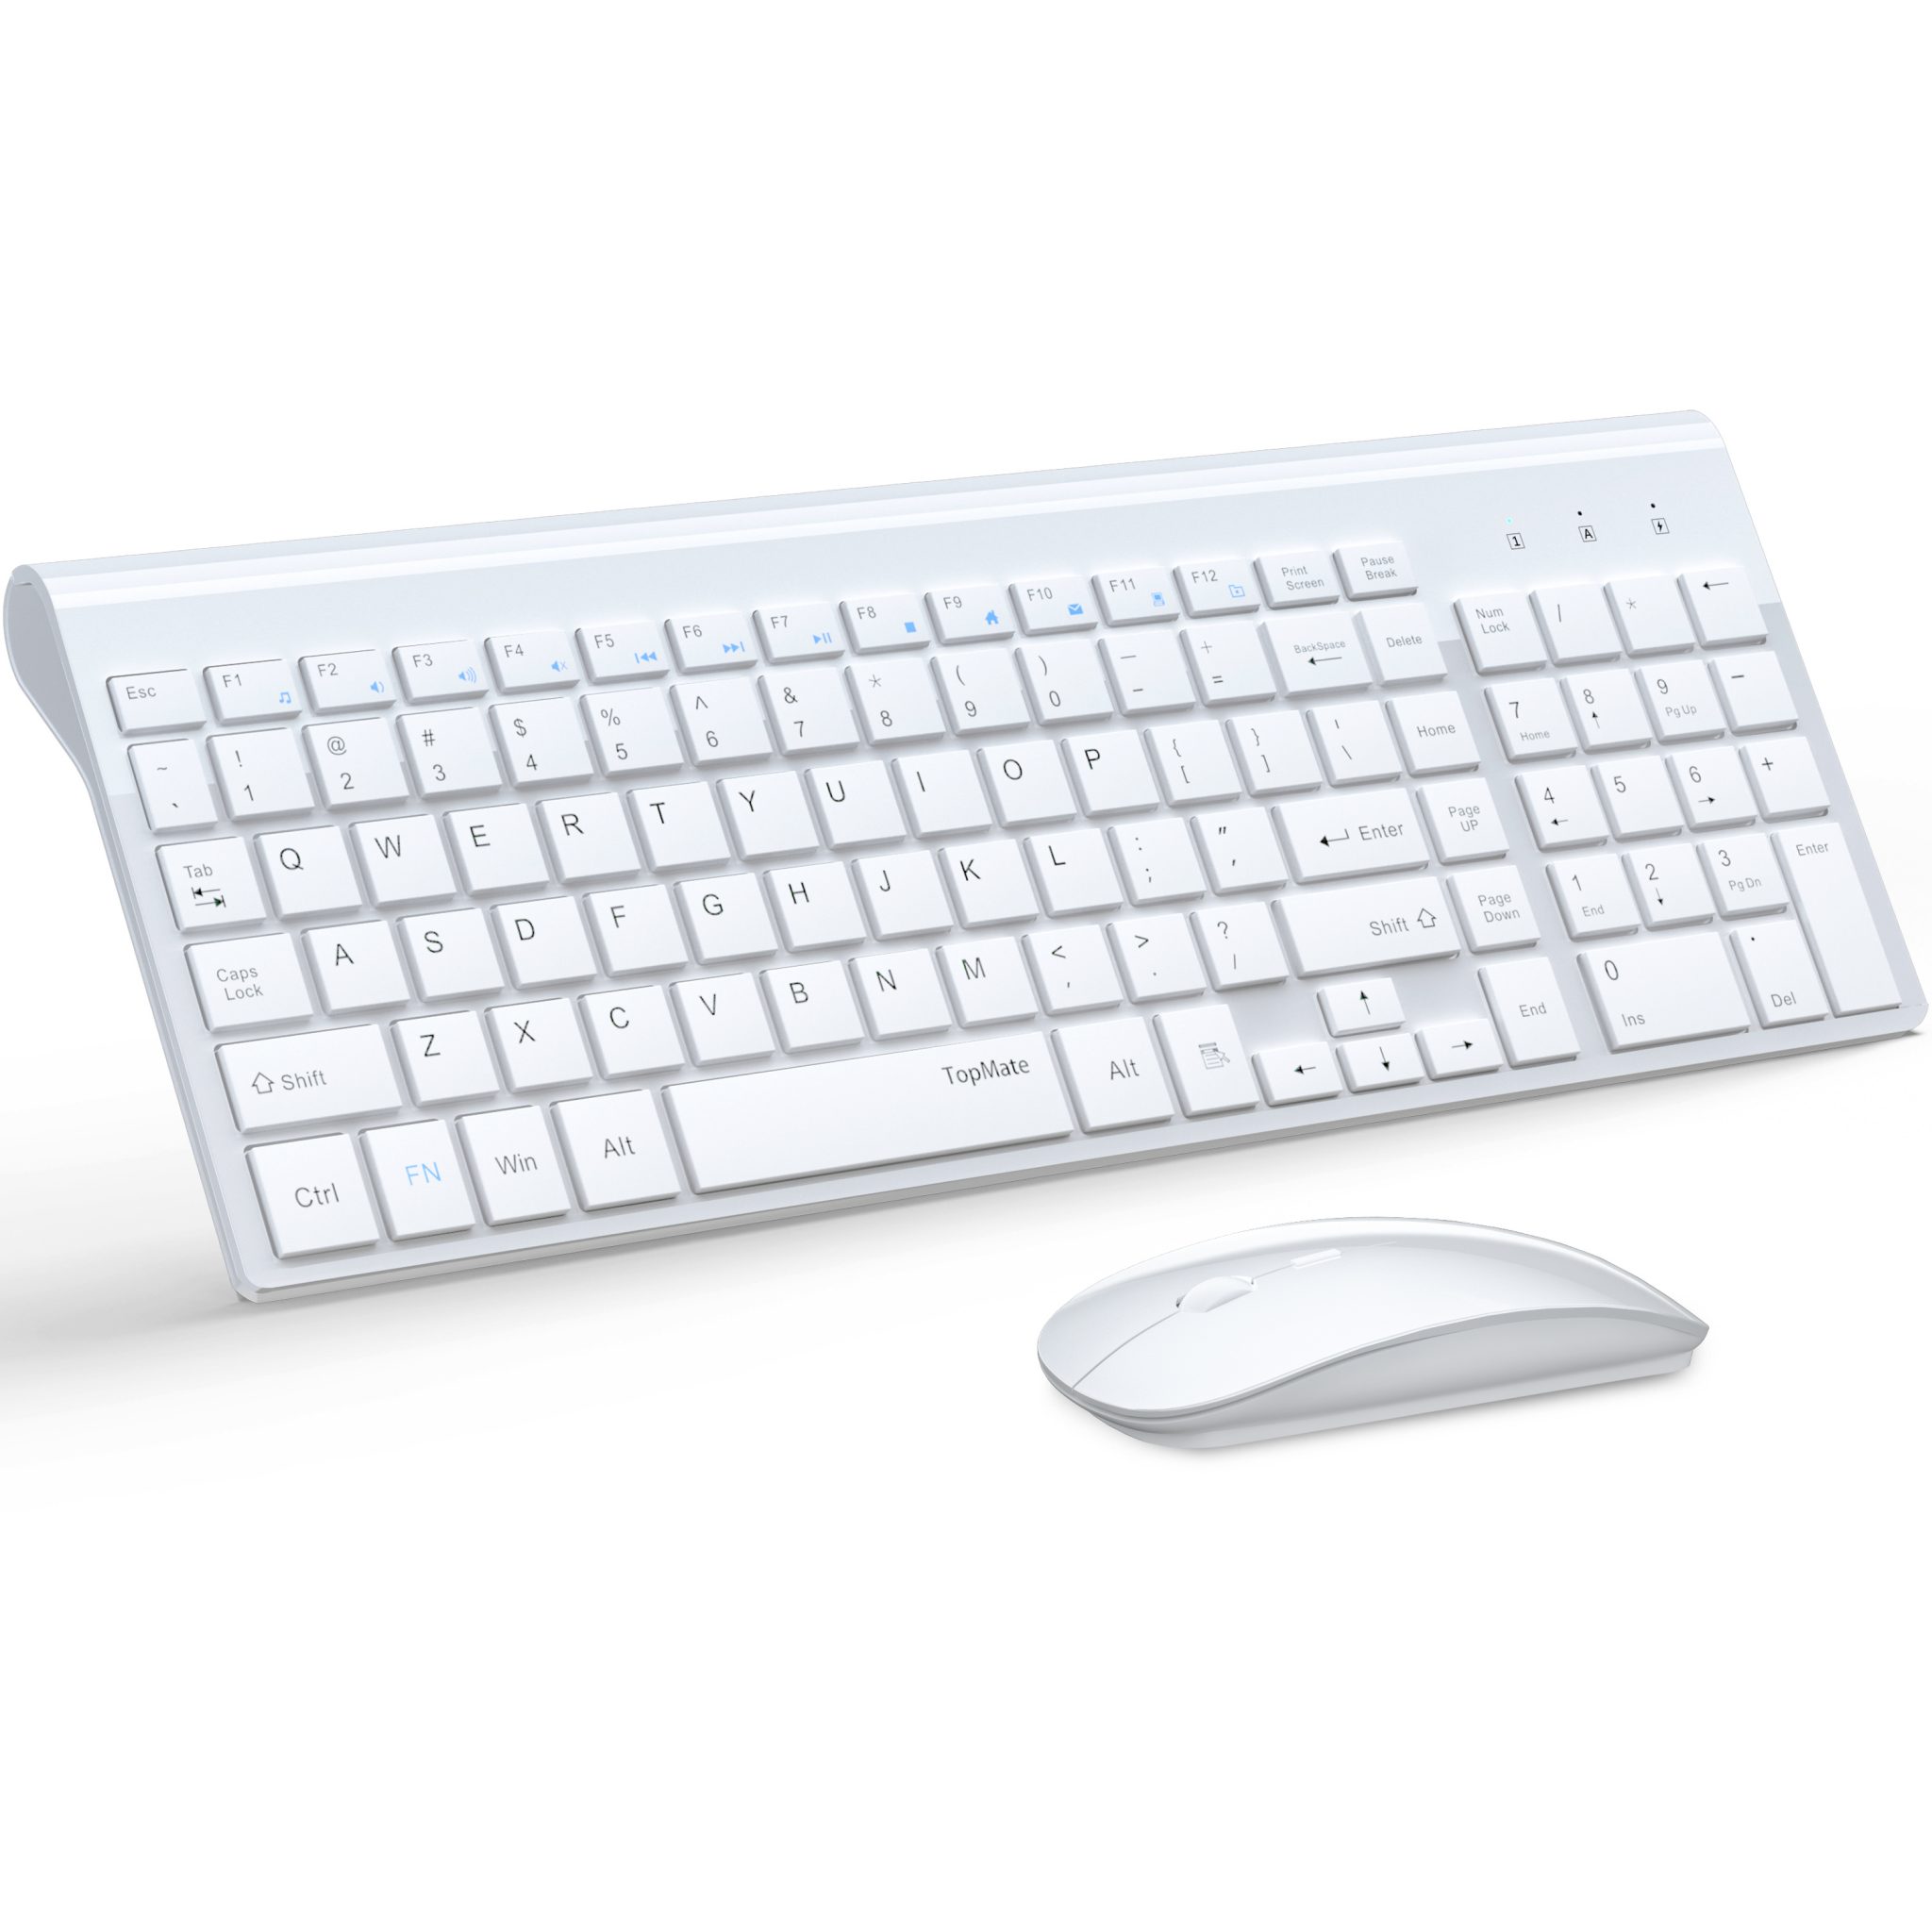 Wireless Keyboard and Mouse